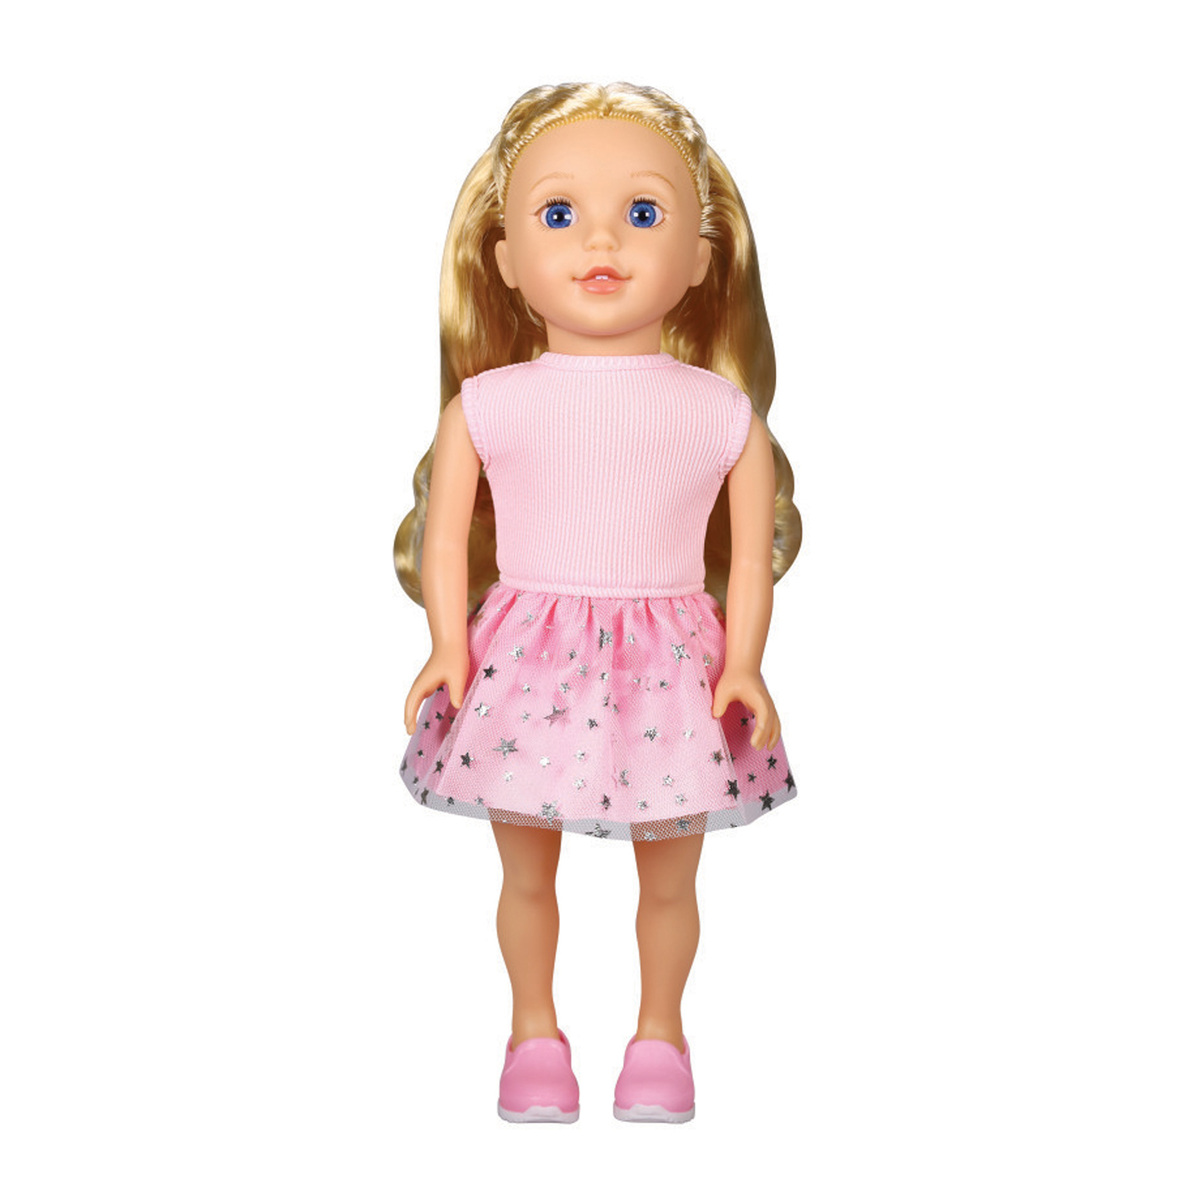 Lotus Bumbleberry Girl Doll 15in 15151/54